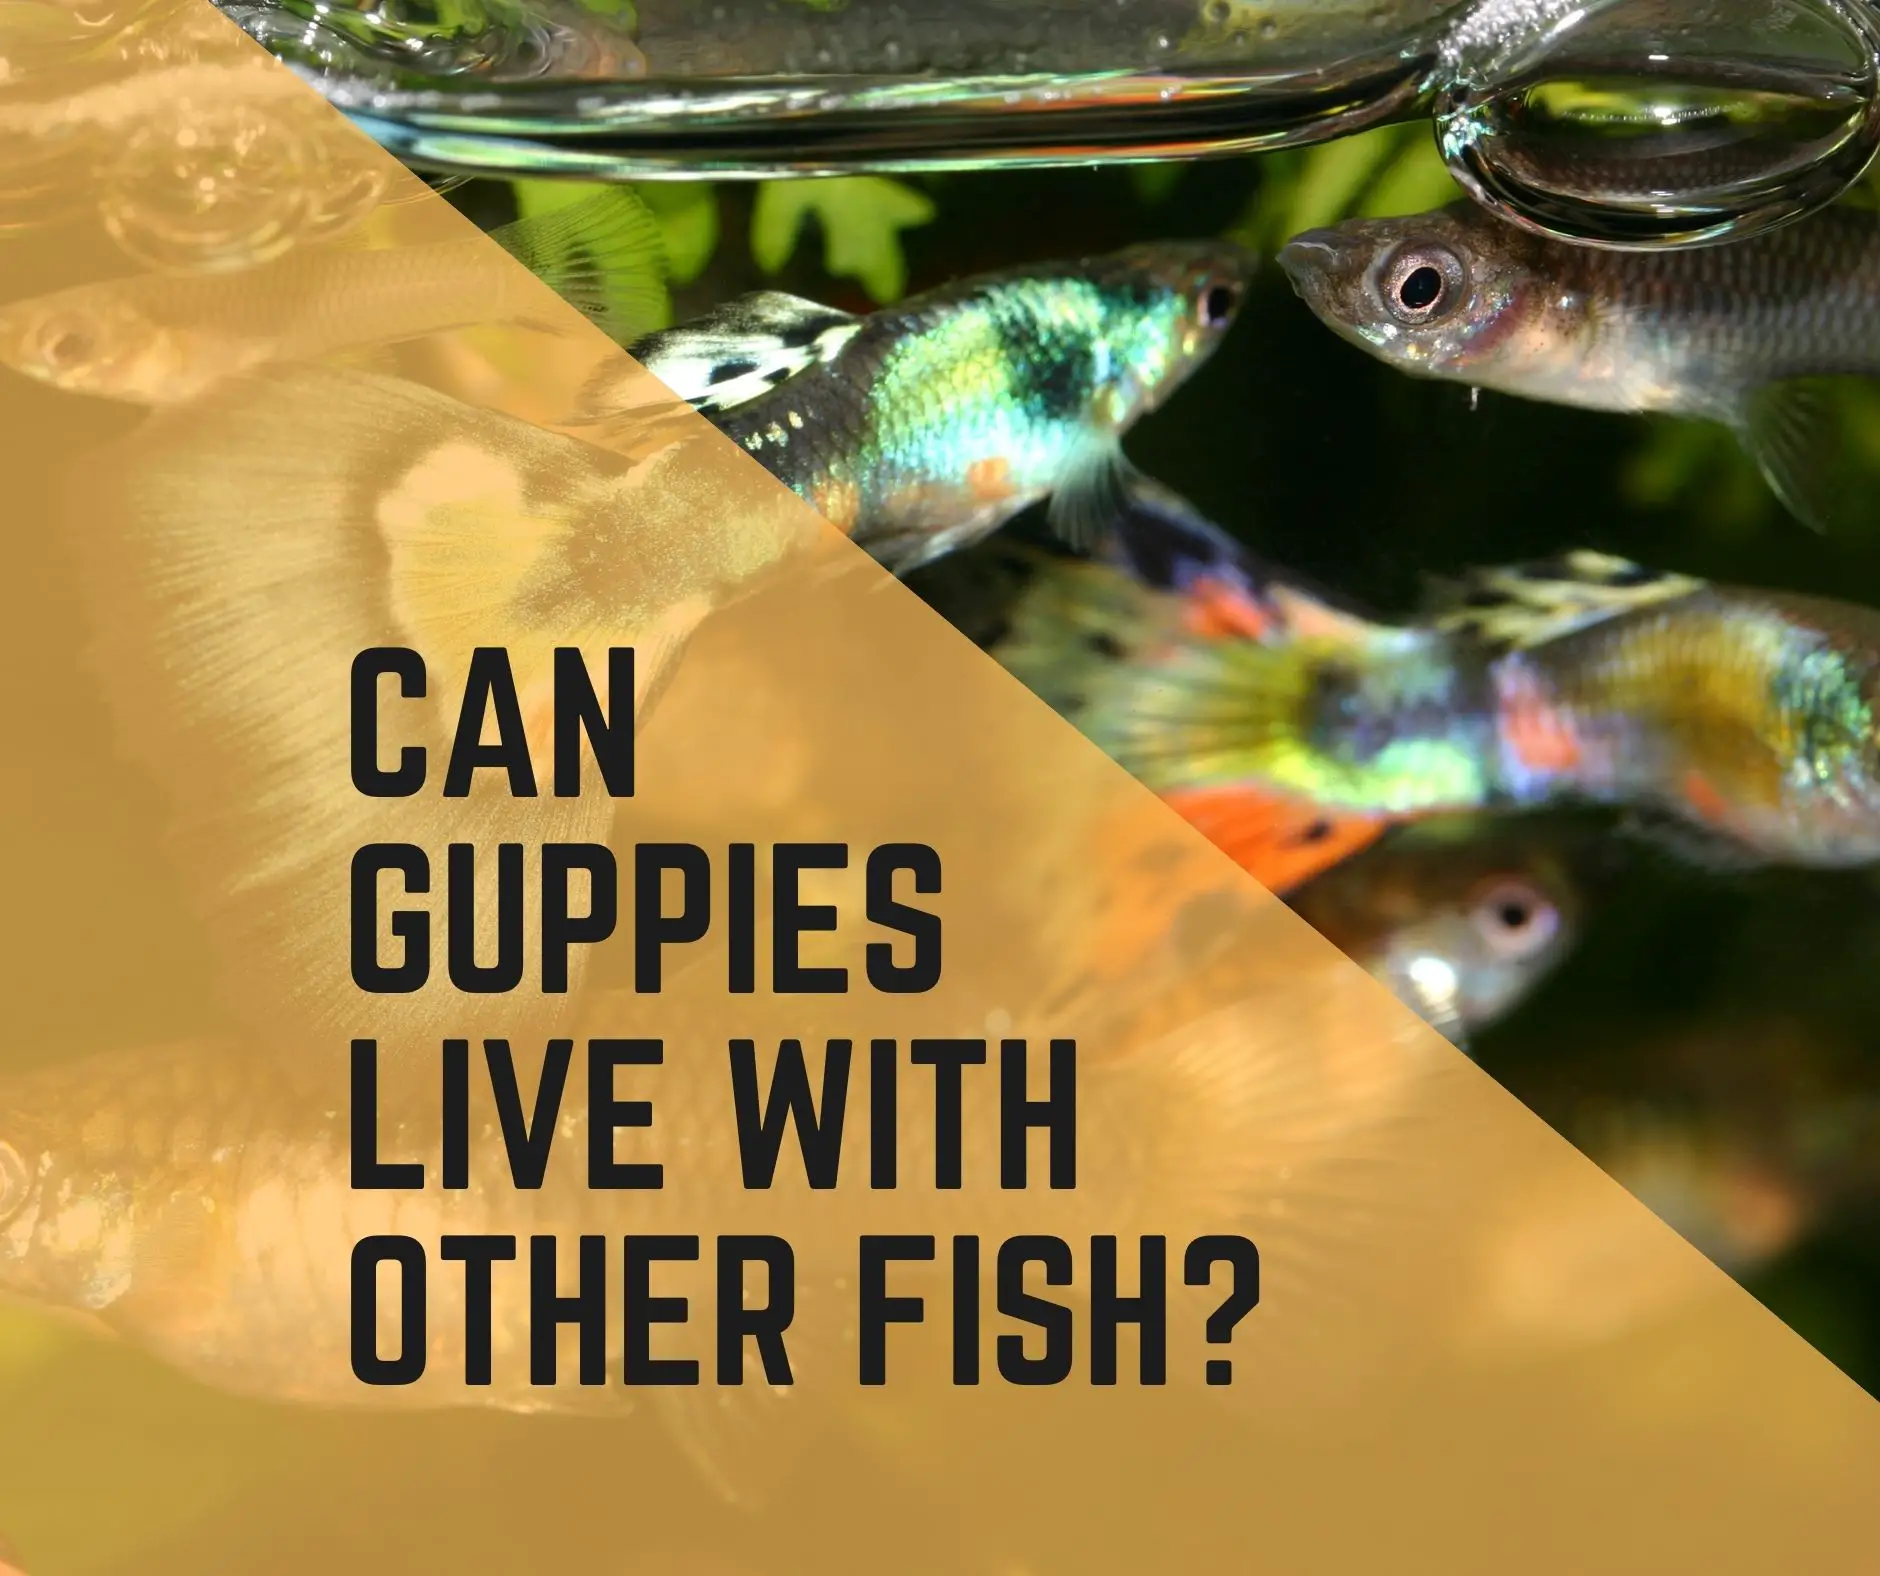 Can Guppies Live With Other Fish